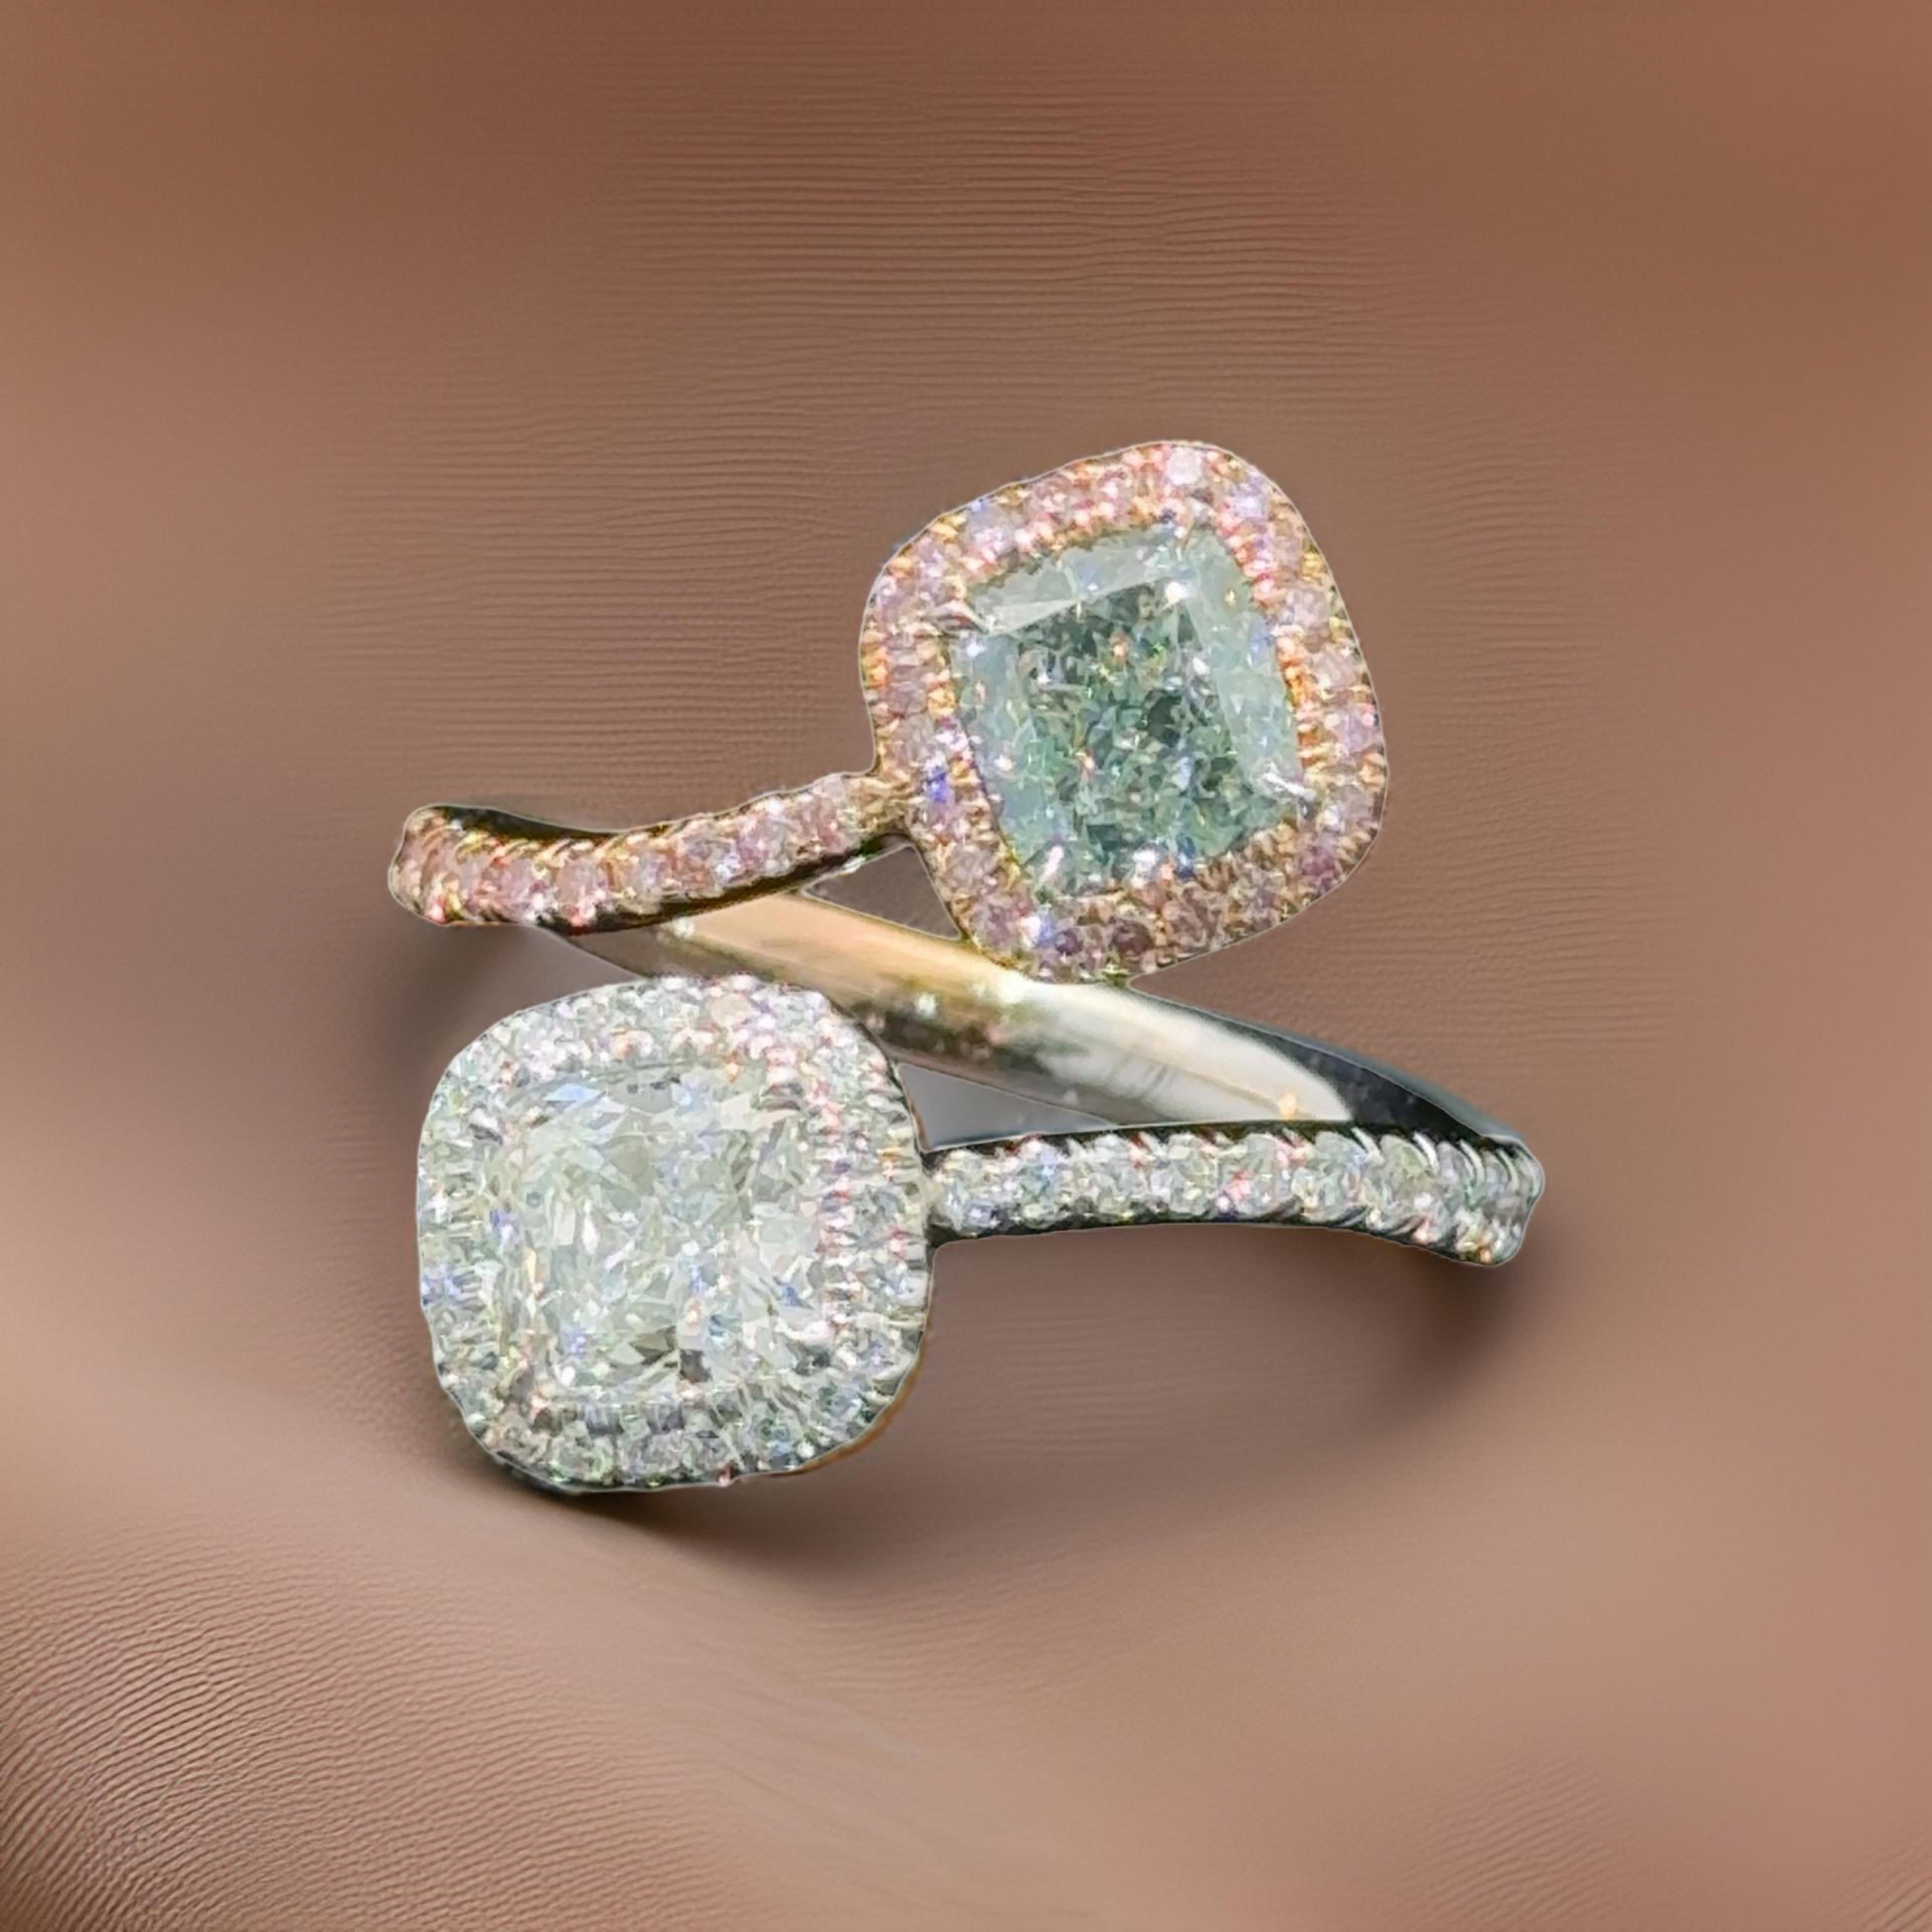 Natural Green Fancy Color Diamonds are a rarity from nature! Green diamonds most commonly come with secondary colors. 
Our natural Green Cushion Cut is Graded as STRAIGHT Fancy Light Green from the Gemological Institute of America (GIA), meaning it